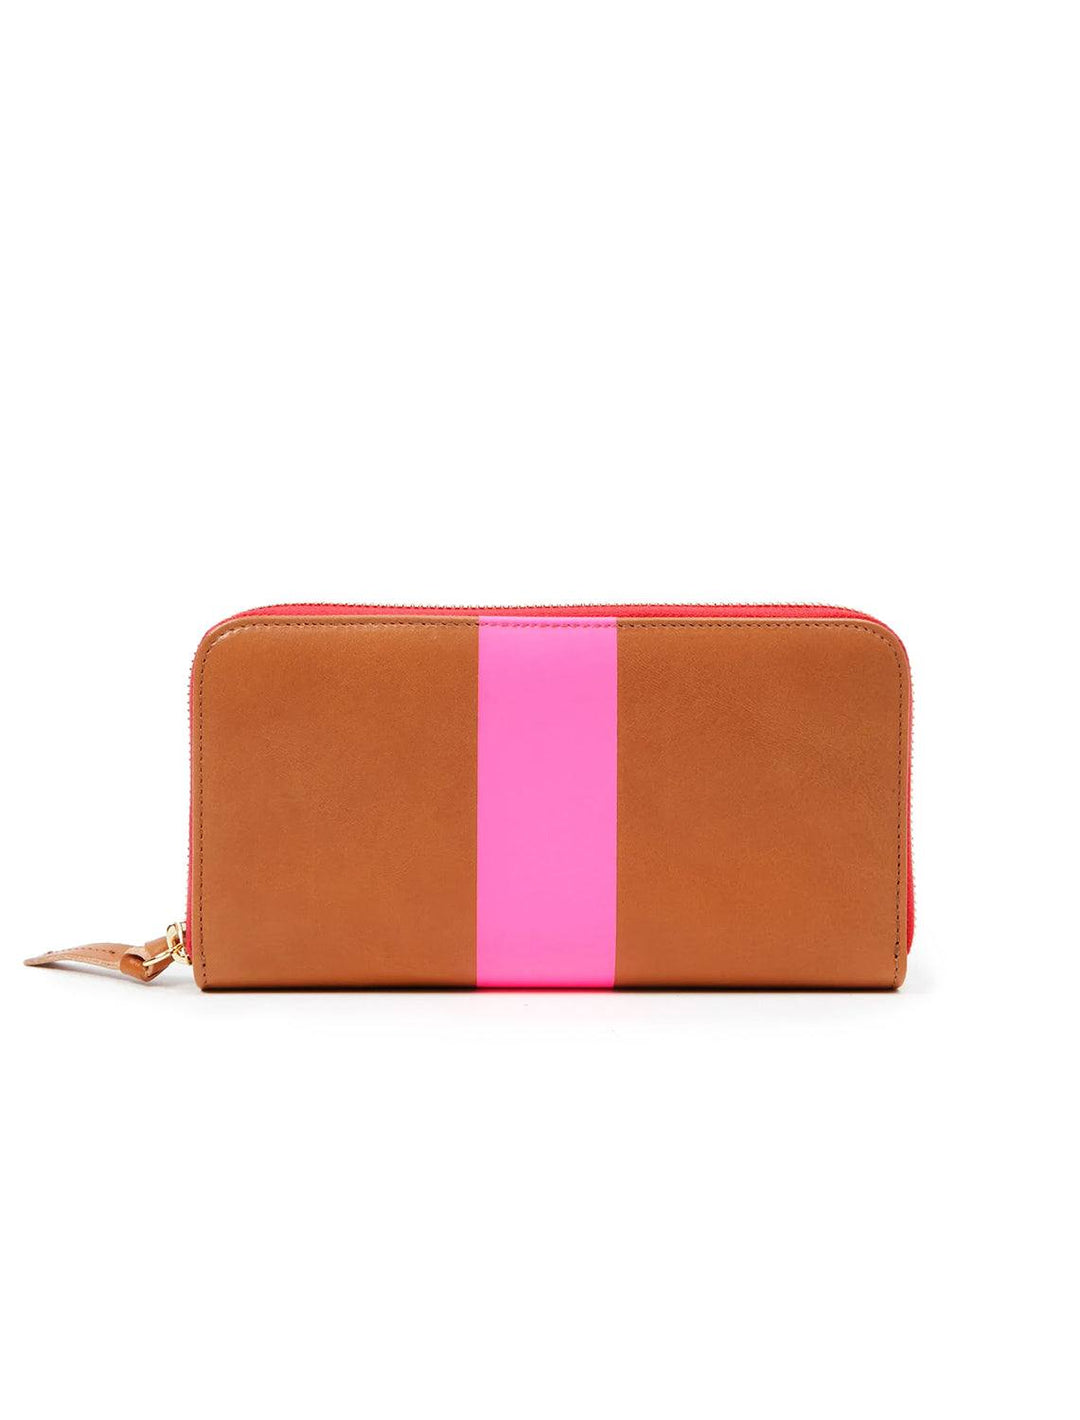 Front view of Clare V.'s zip wallet in natural with neon pink stripe.